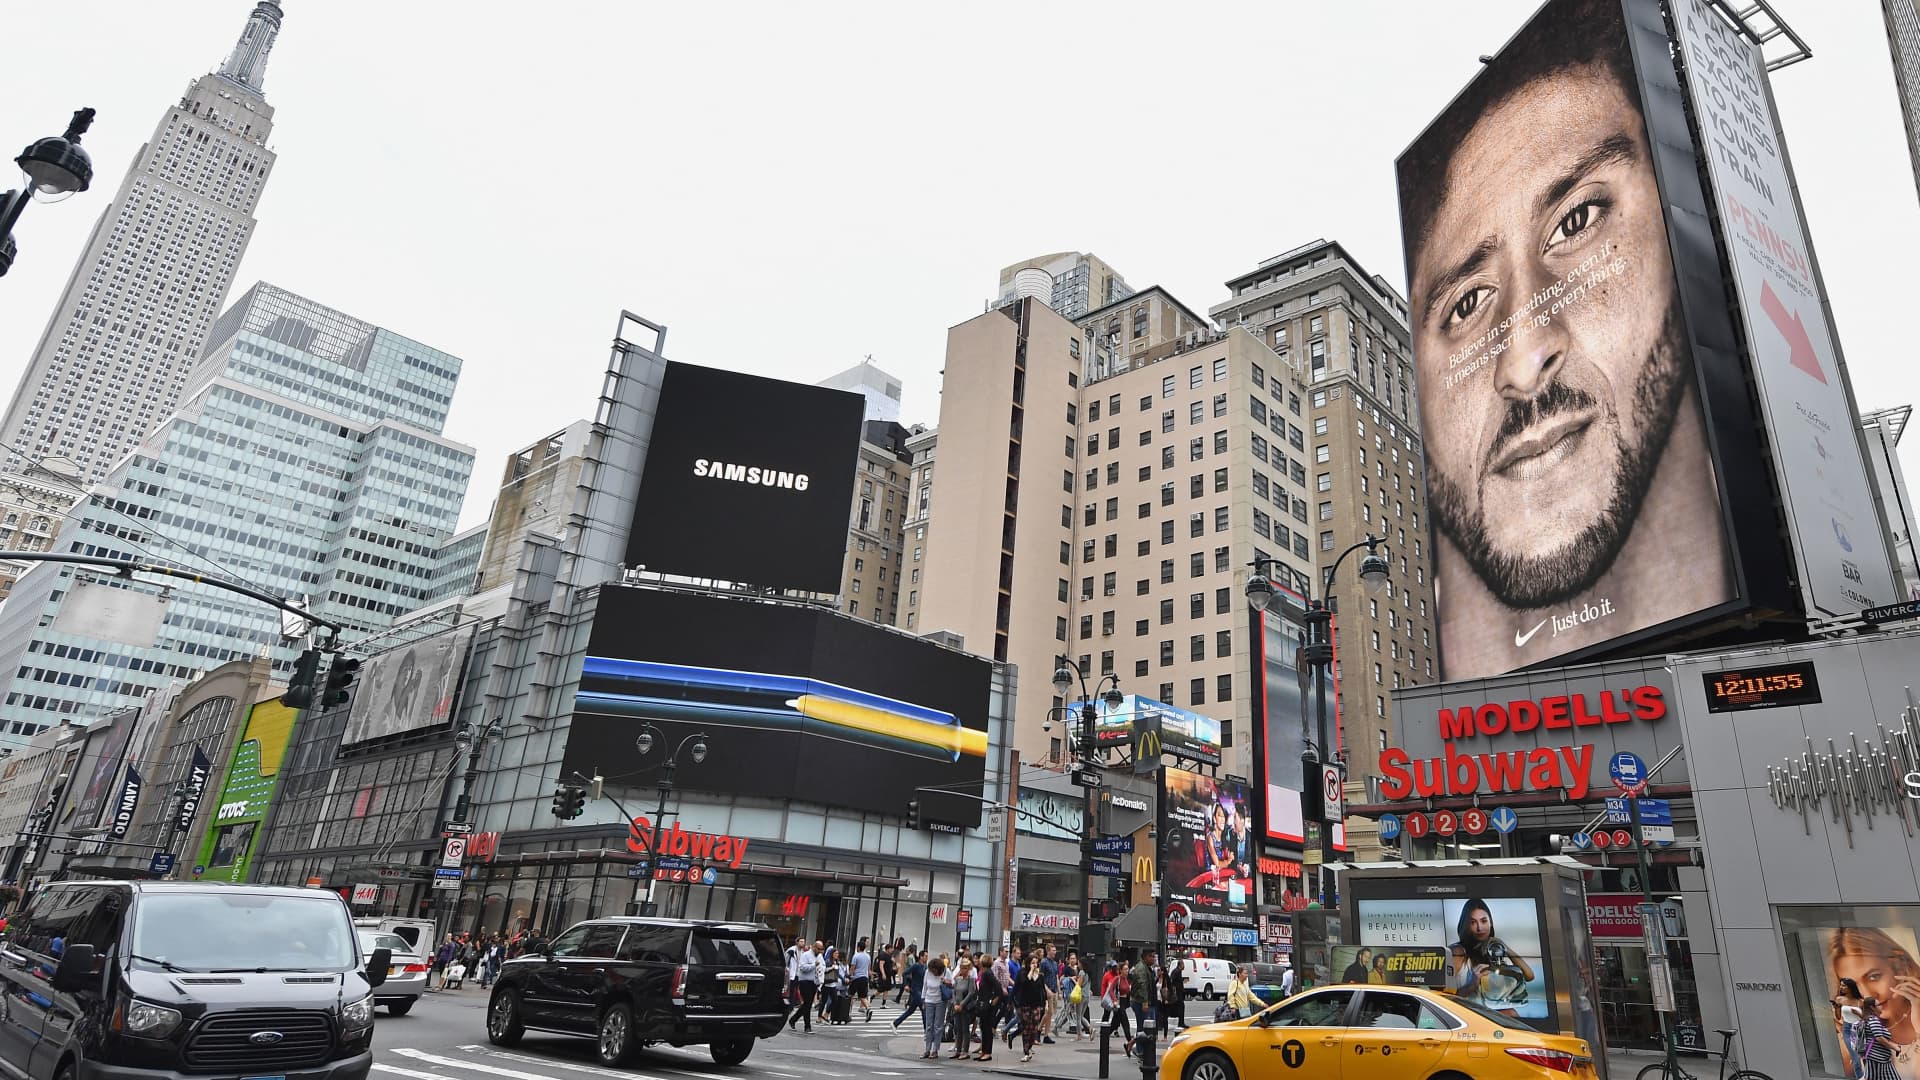 A Nike Ad featuring football player Colin Kaepernick is on display September 8, 2018 in New York City.